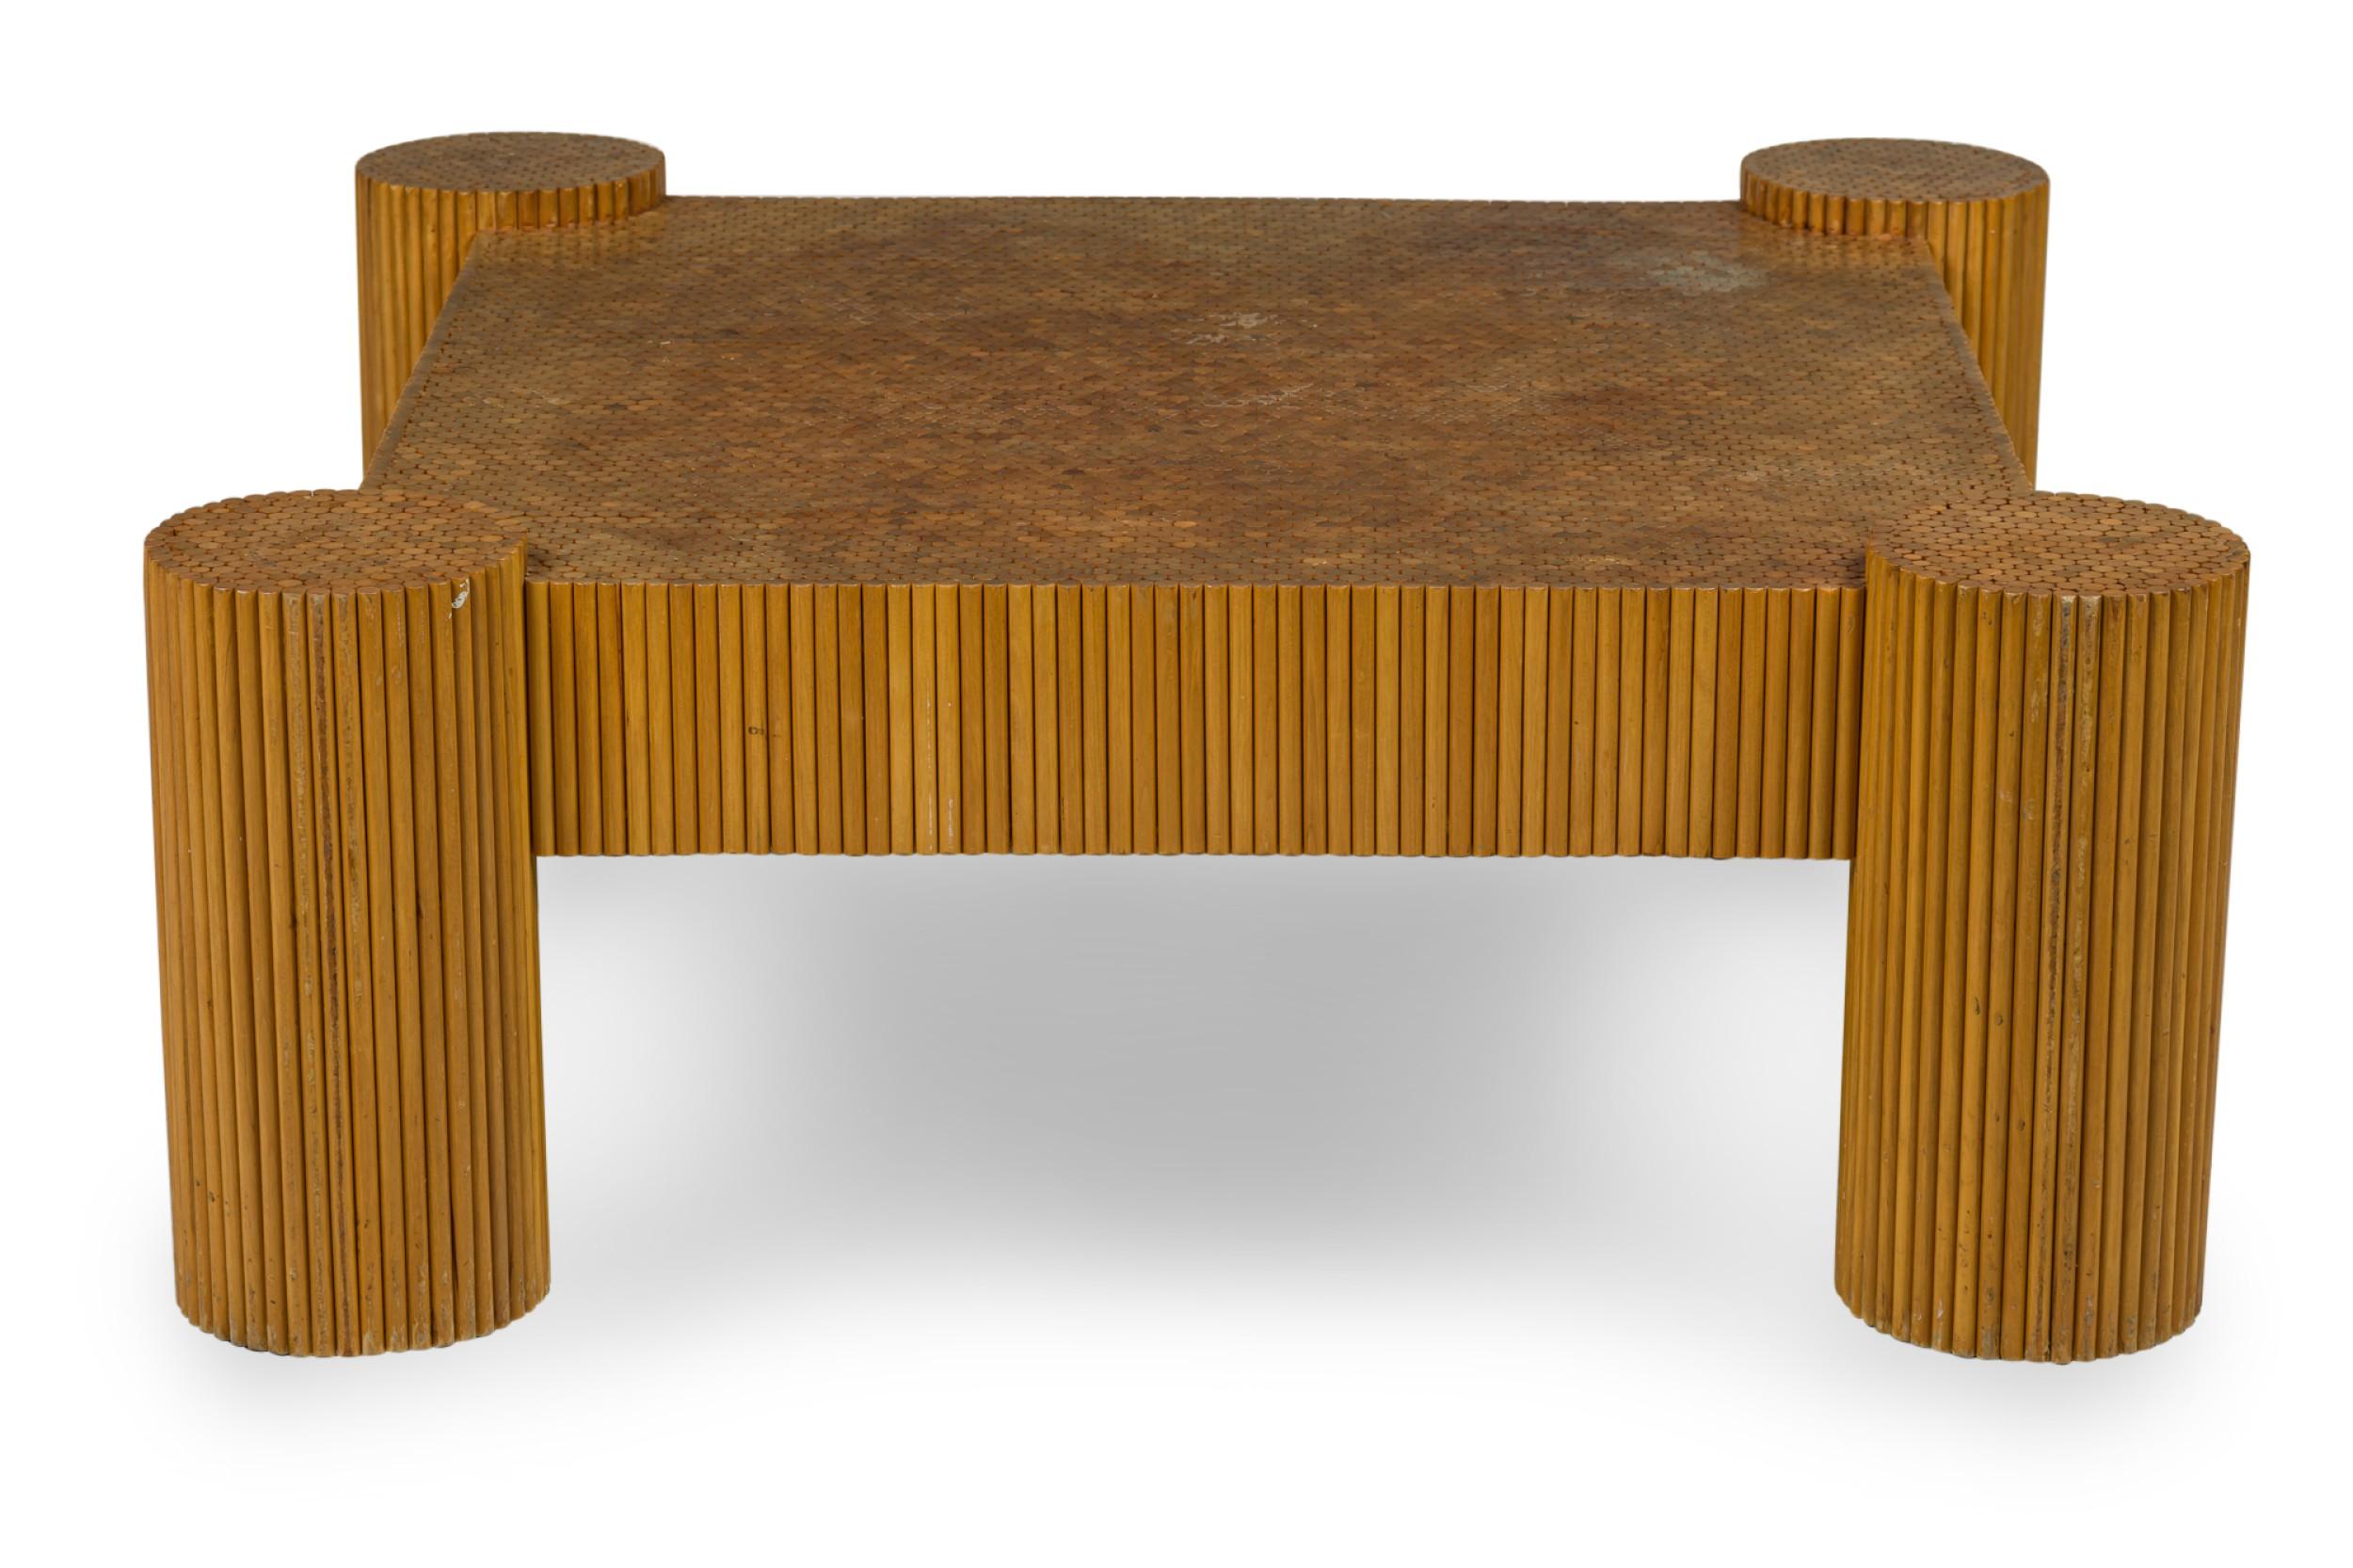 20th Century Ernest C. Masi American Mid-Century Bamboo Coffee Table For Sale